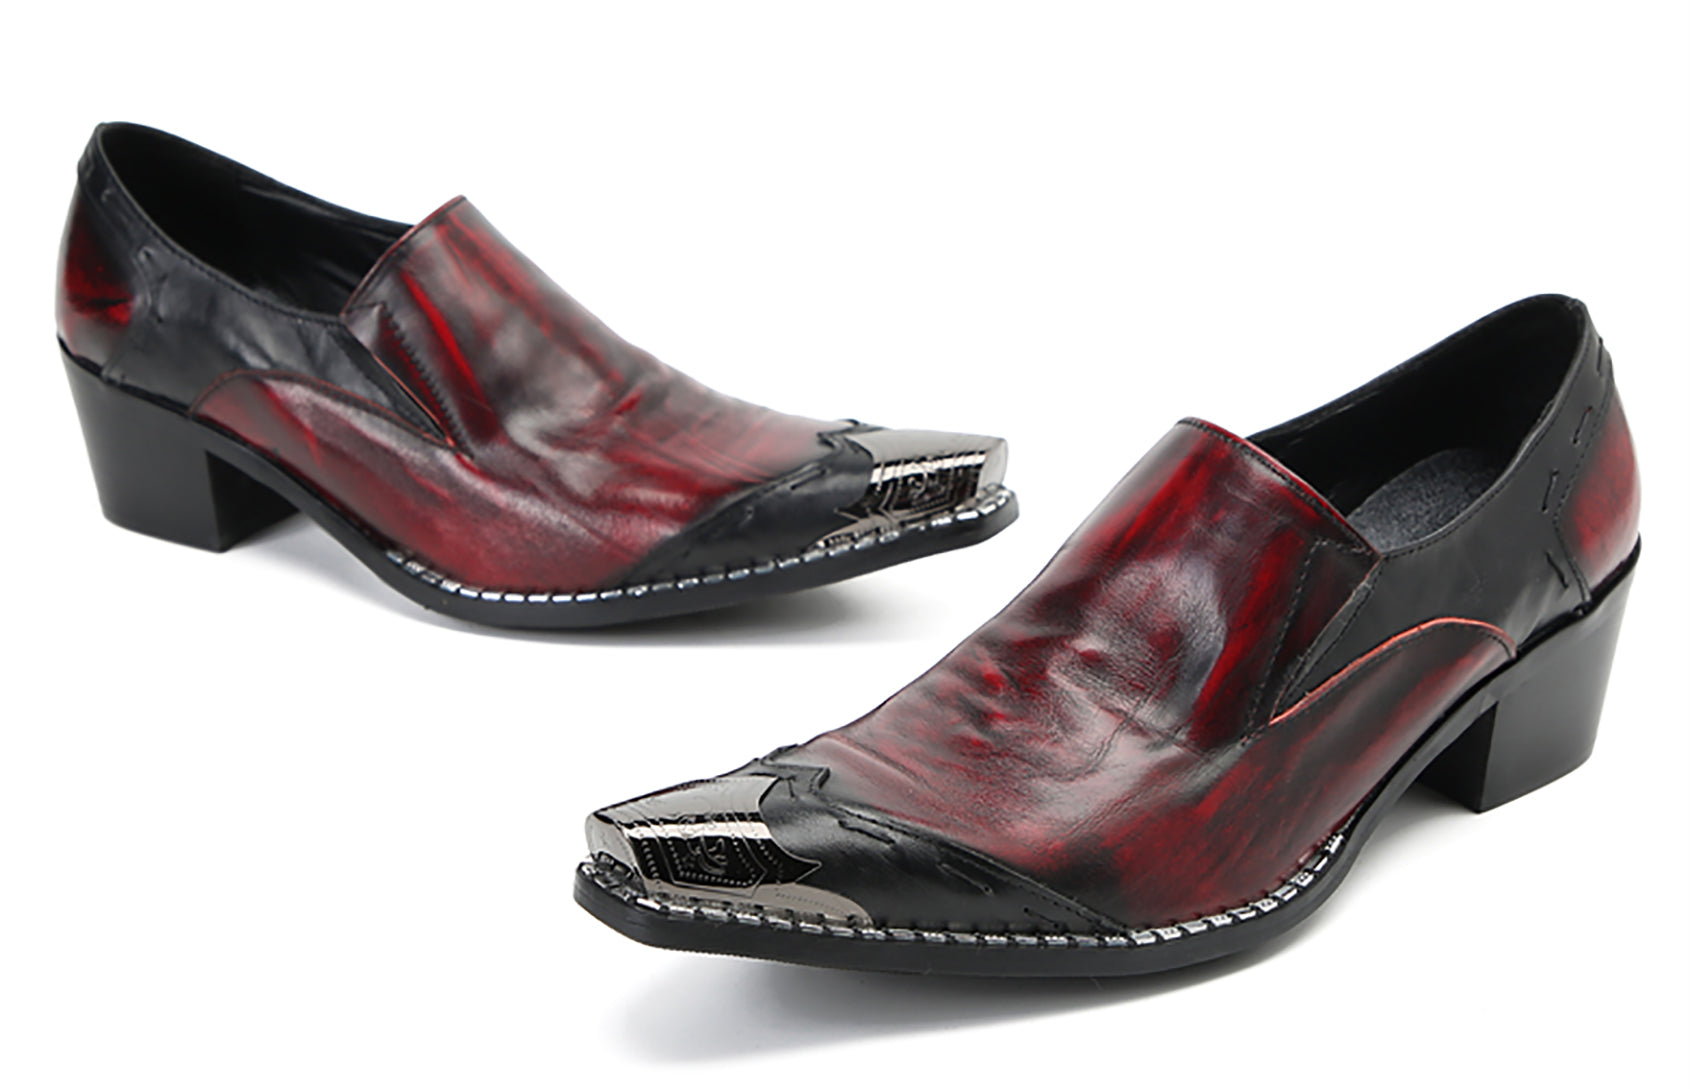 Men's Fashion Metal Pointed Toeded Western Loafers